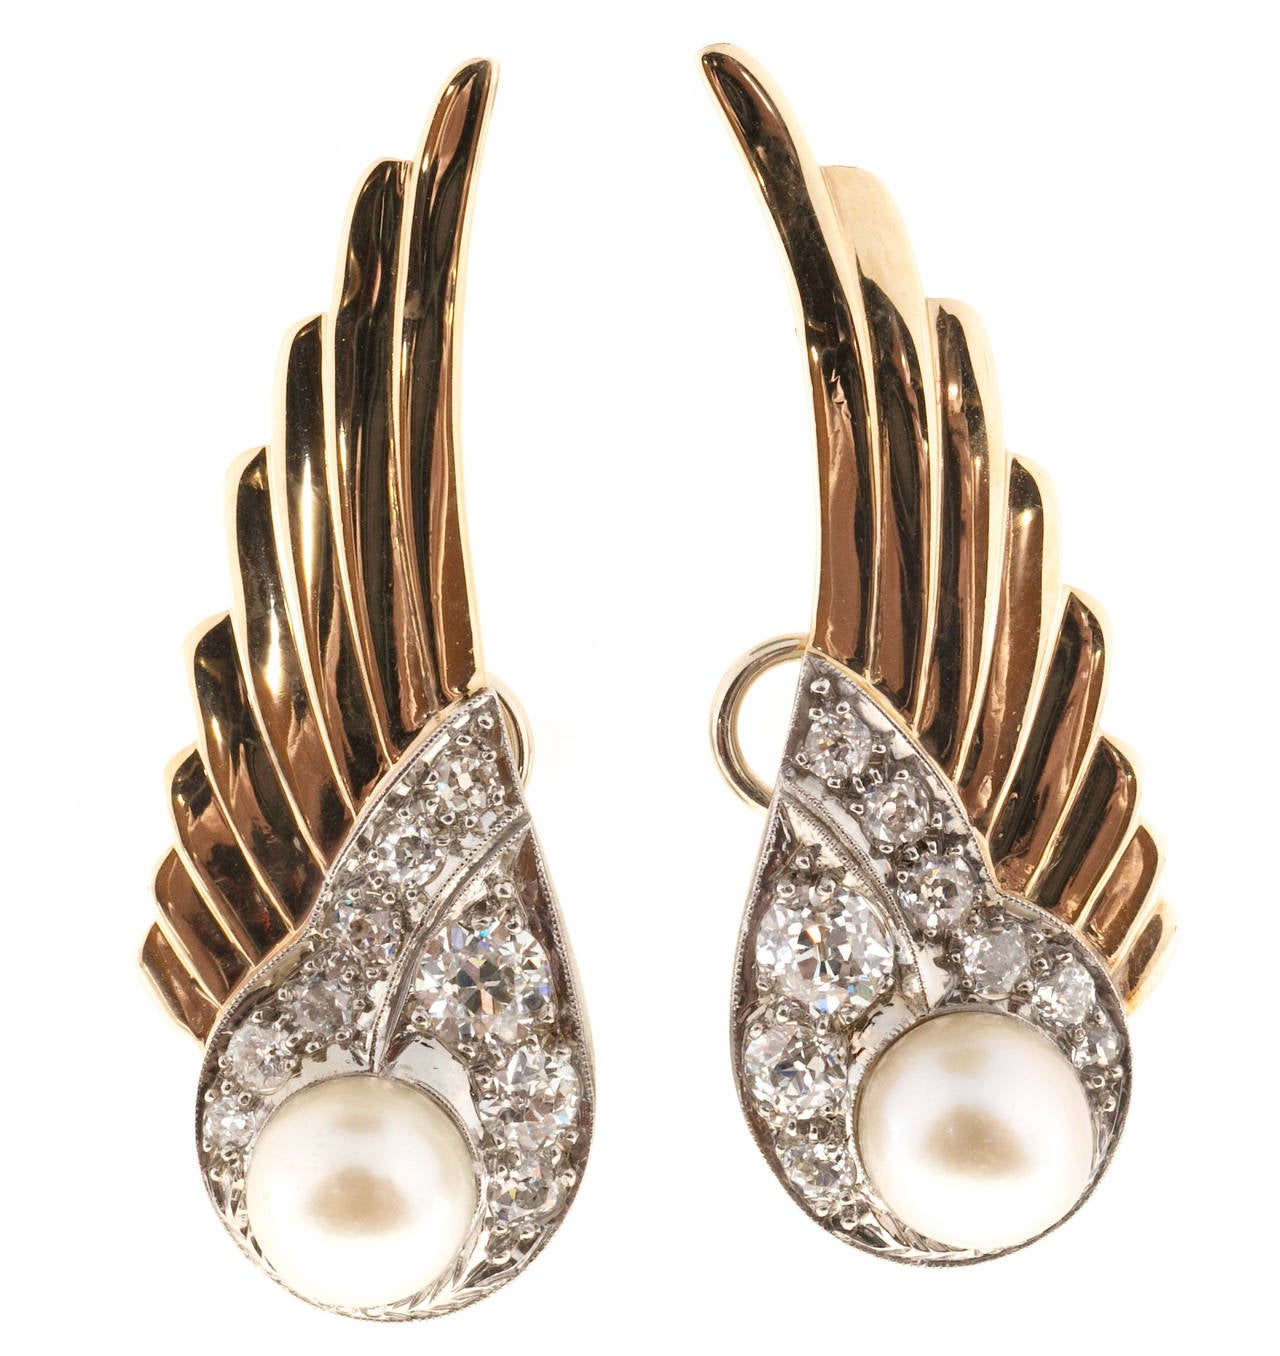 Wing design earrings are one of my favorite styles. These are a very fine example. 18k white gold bead set bottoms with European cut diamonds and beautiful silvery white pearls. The bottom section is 18k white gold. The wings are 14k yellow gold.